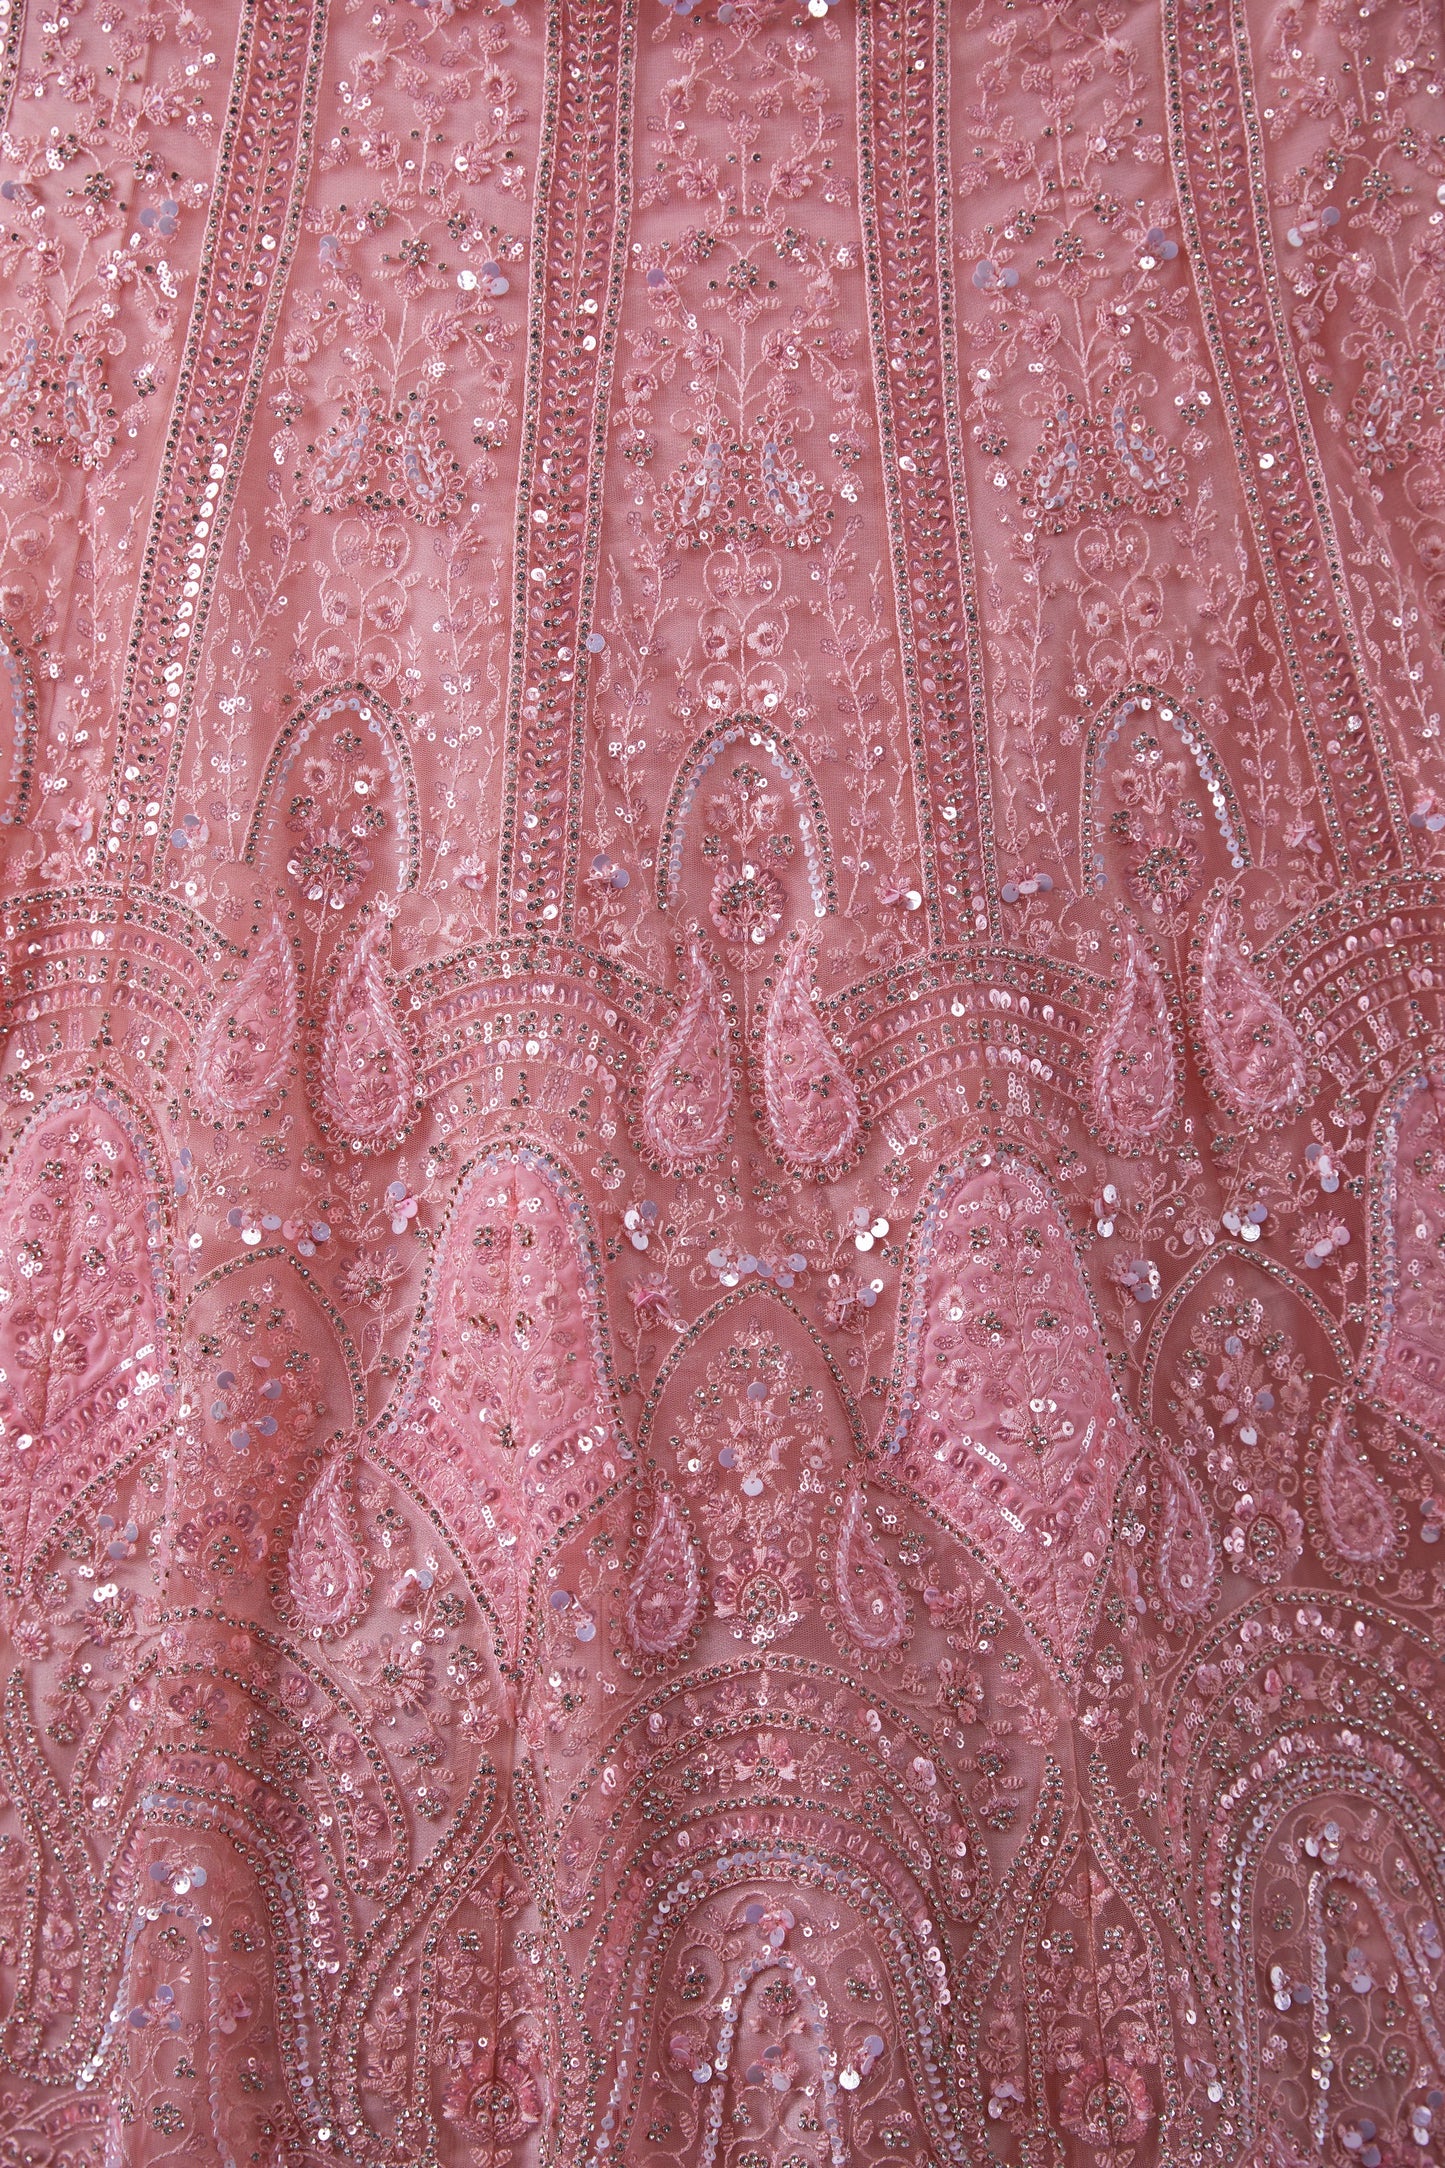 Pink Net Lehenga Choli For Indian Festivals & Weddings - Sequence Embroidery Work, Beads Work, Thread Embroidery Work